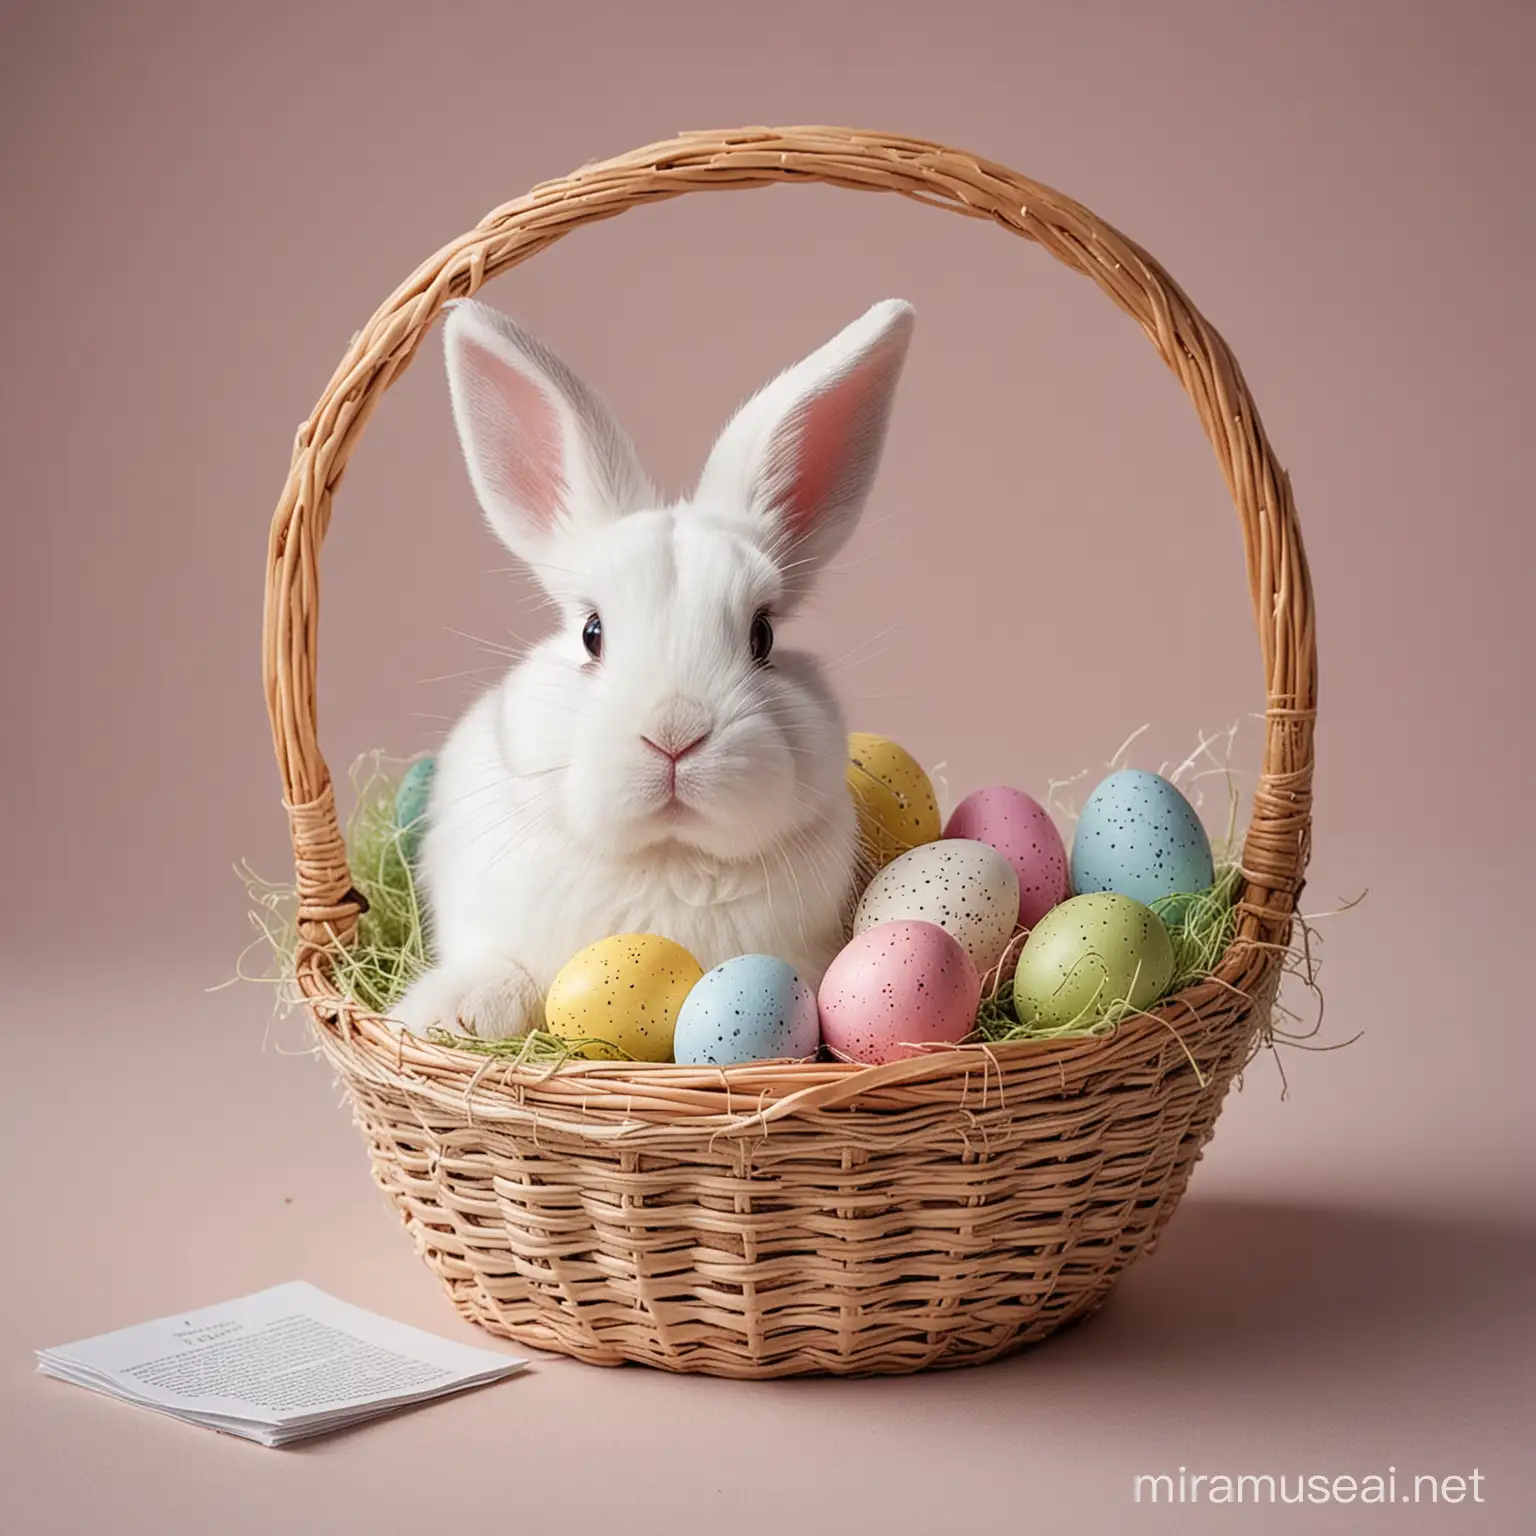 Easter Bunny Holding Easter Basket with Colorful Eggs and Civil Code